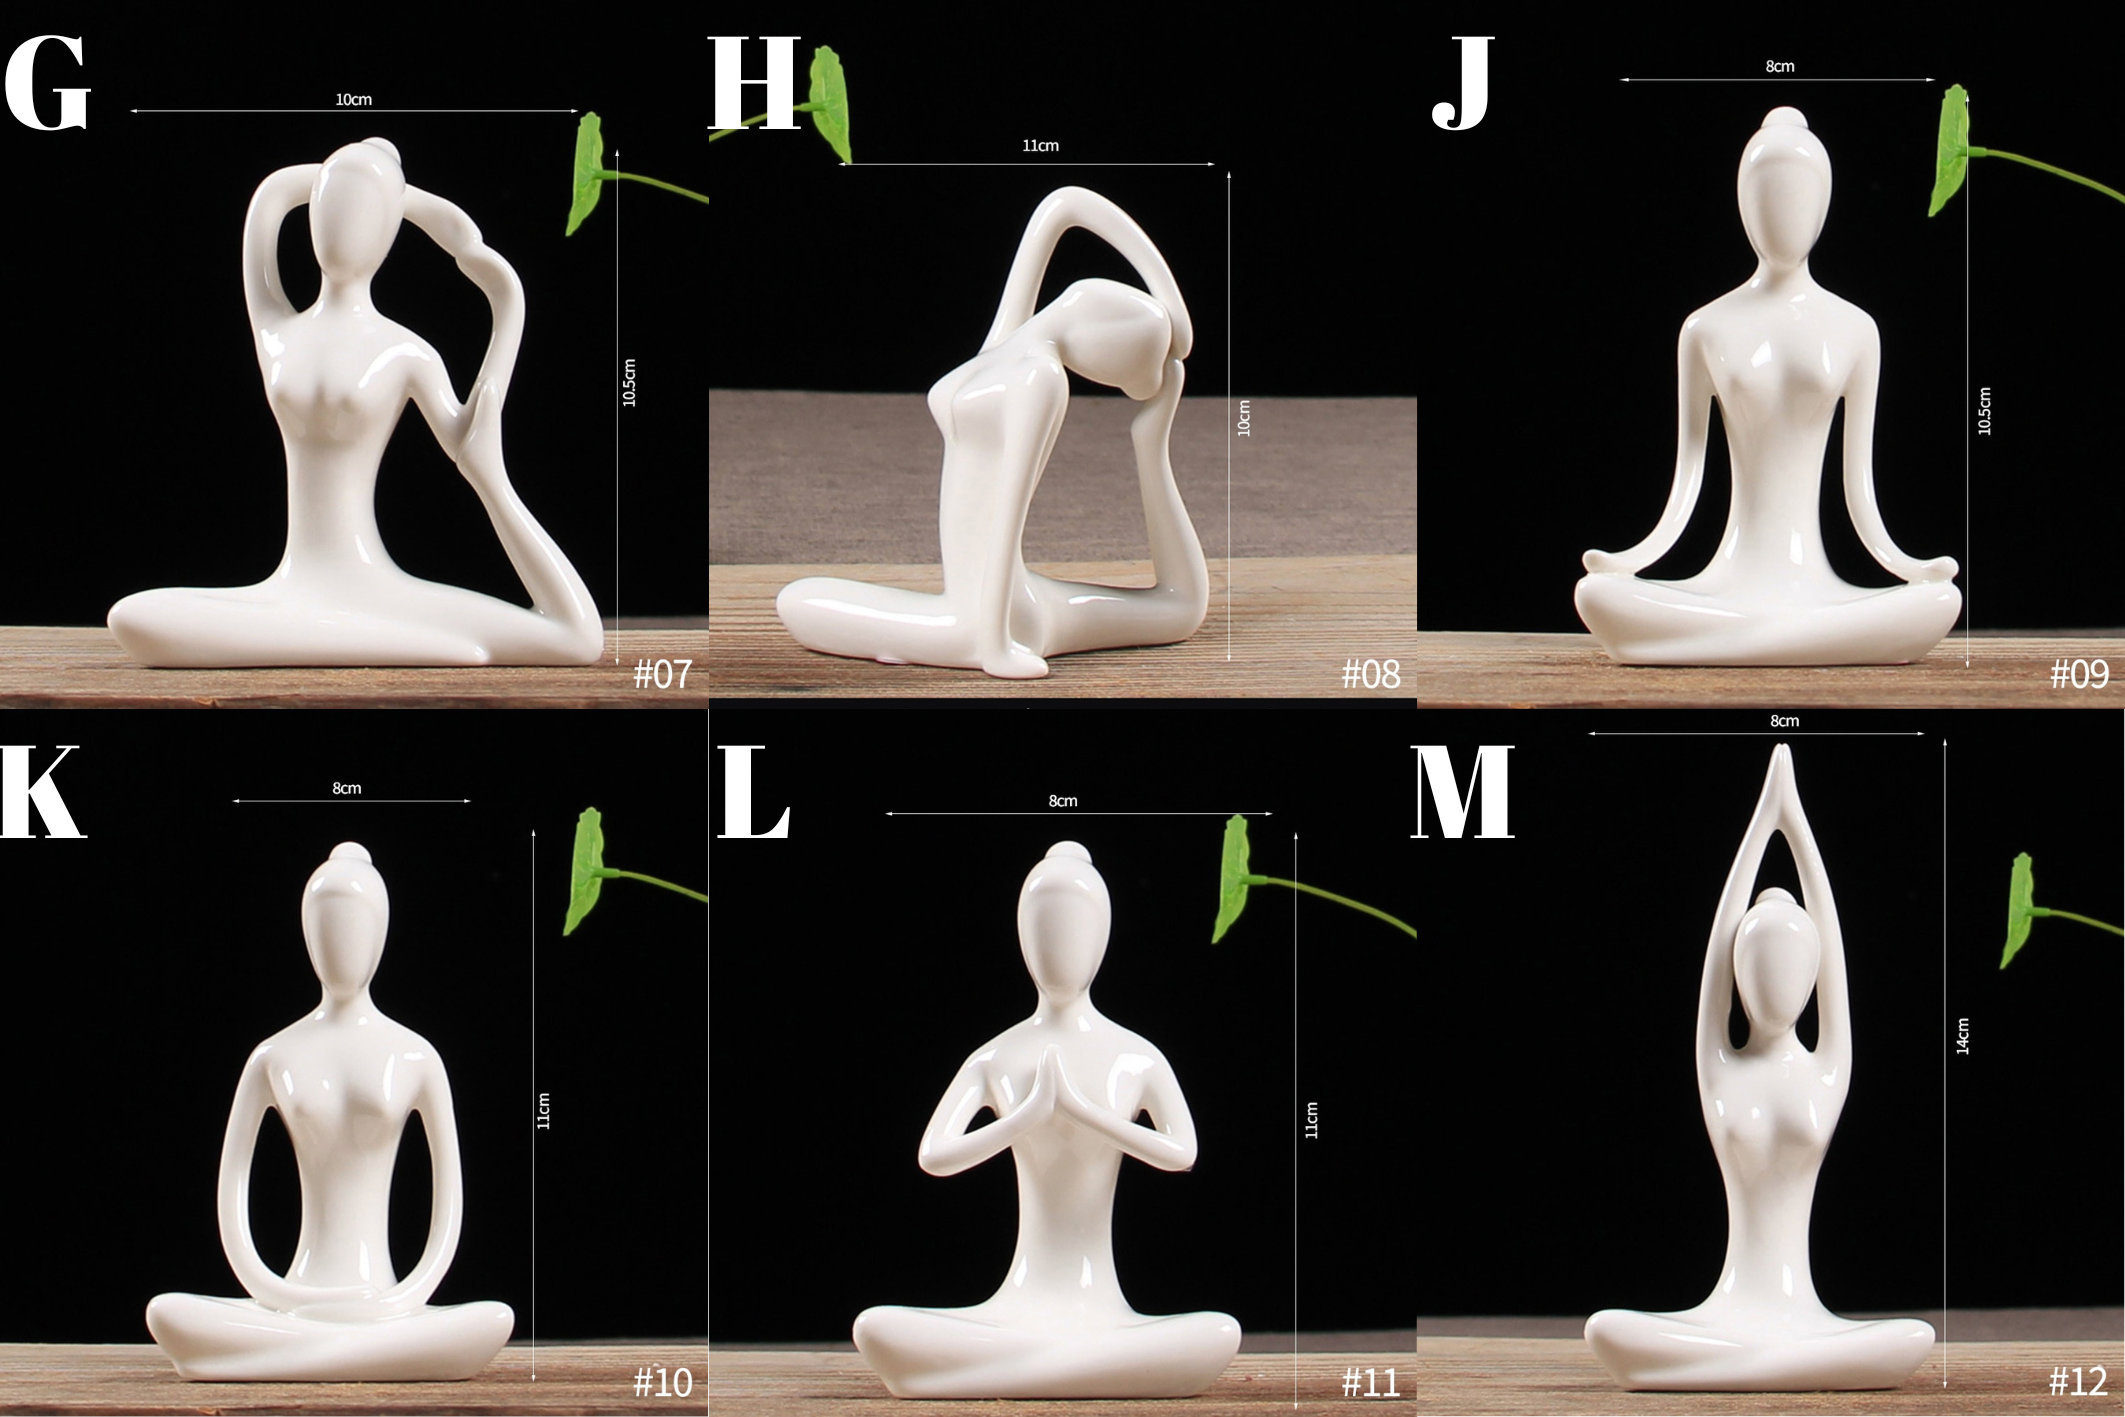 Buy ARPNs Yoga Pose Figure Resin Statues Human Sculptures Home Office Decor  20x21cm Online at Low Prices in India - Amazon.in